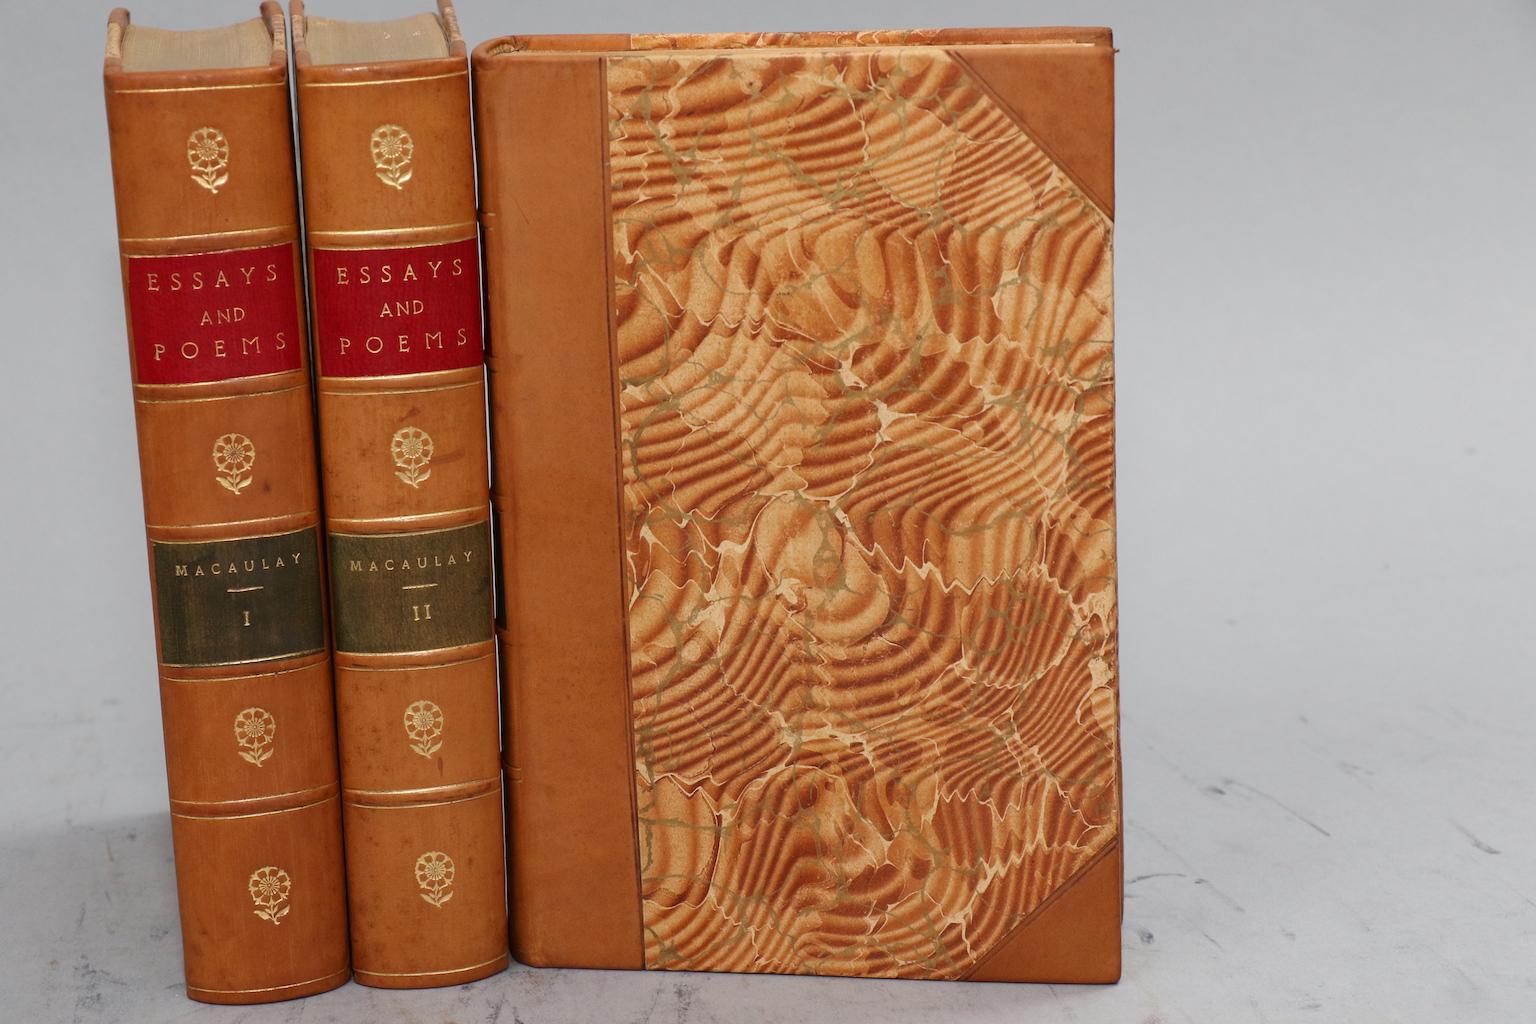 Dyed Books, The Essays and Poems of Thomas A. Macaulay